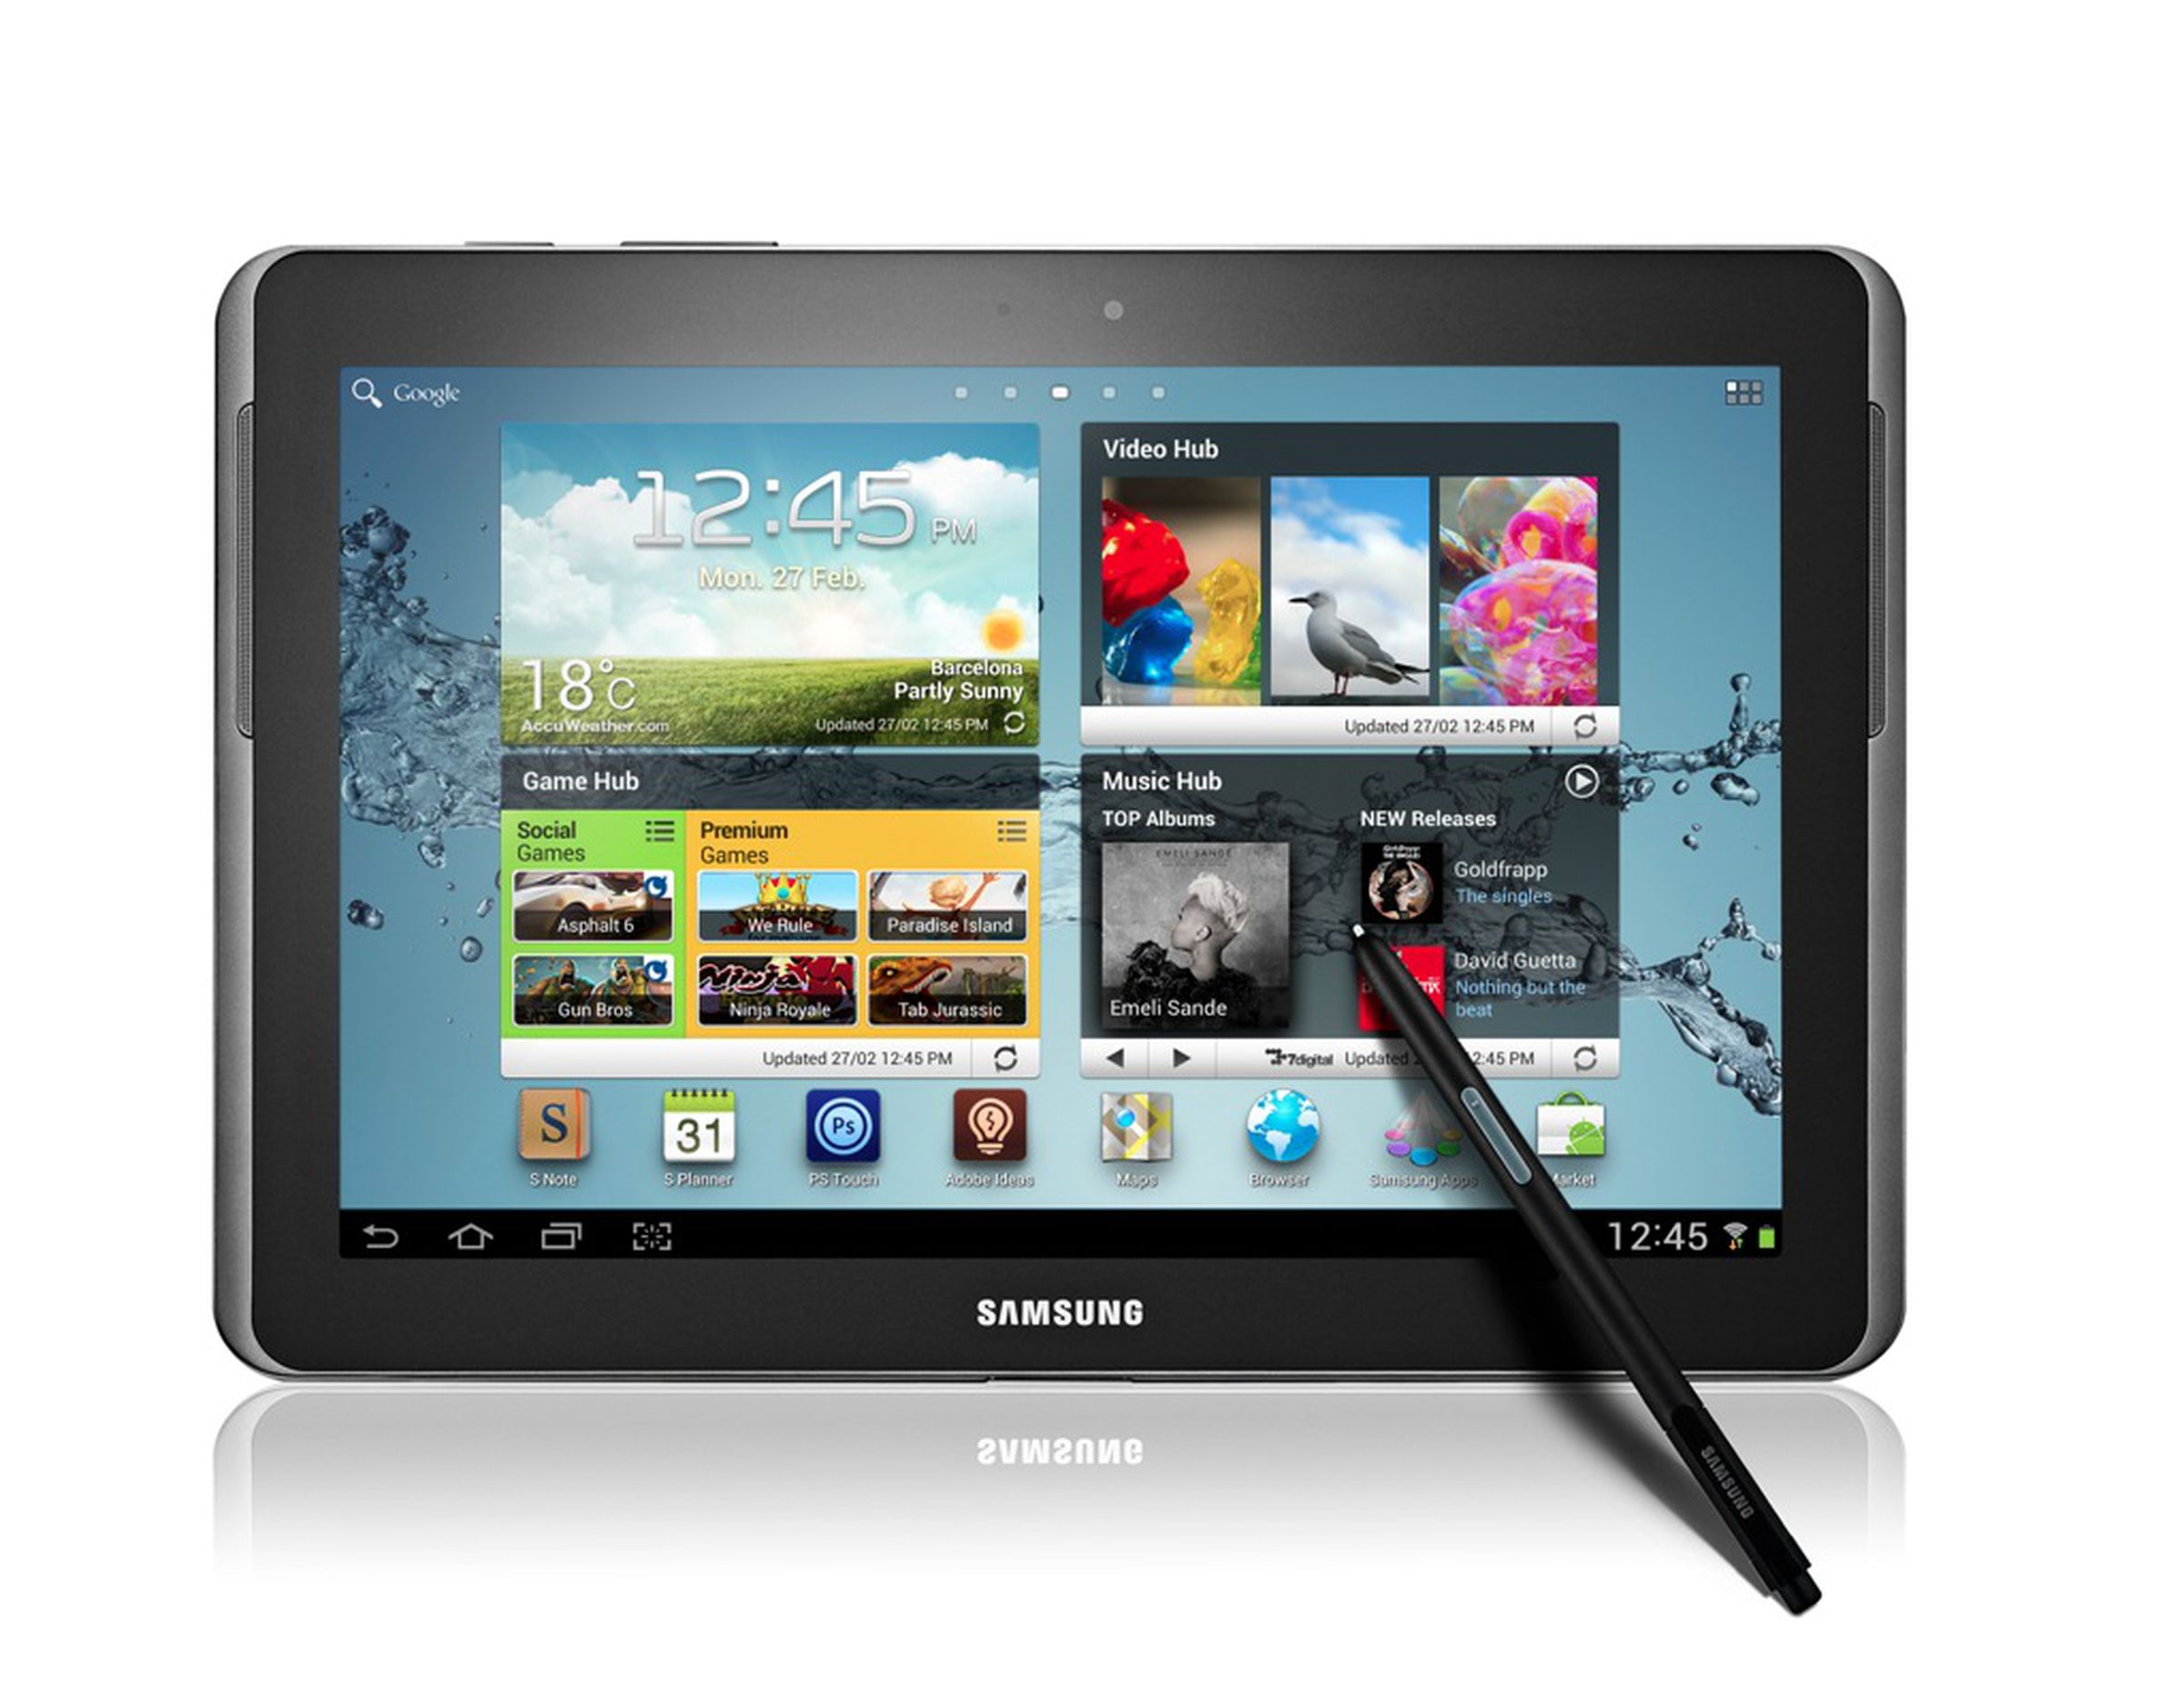 Samsung Galaxy Note 10.1 press images